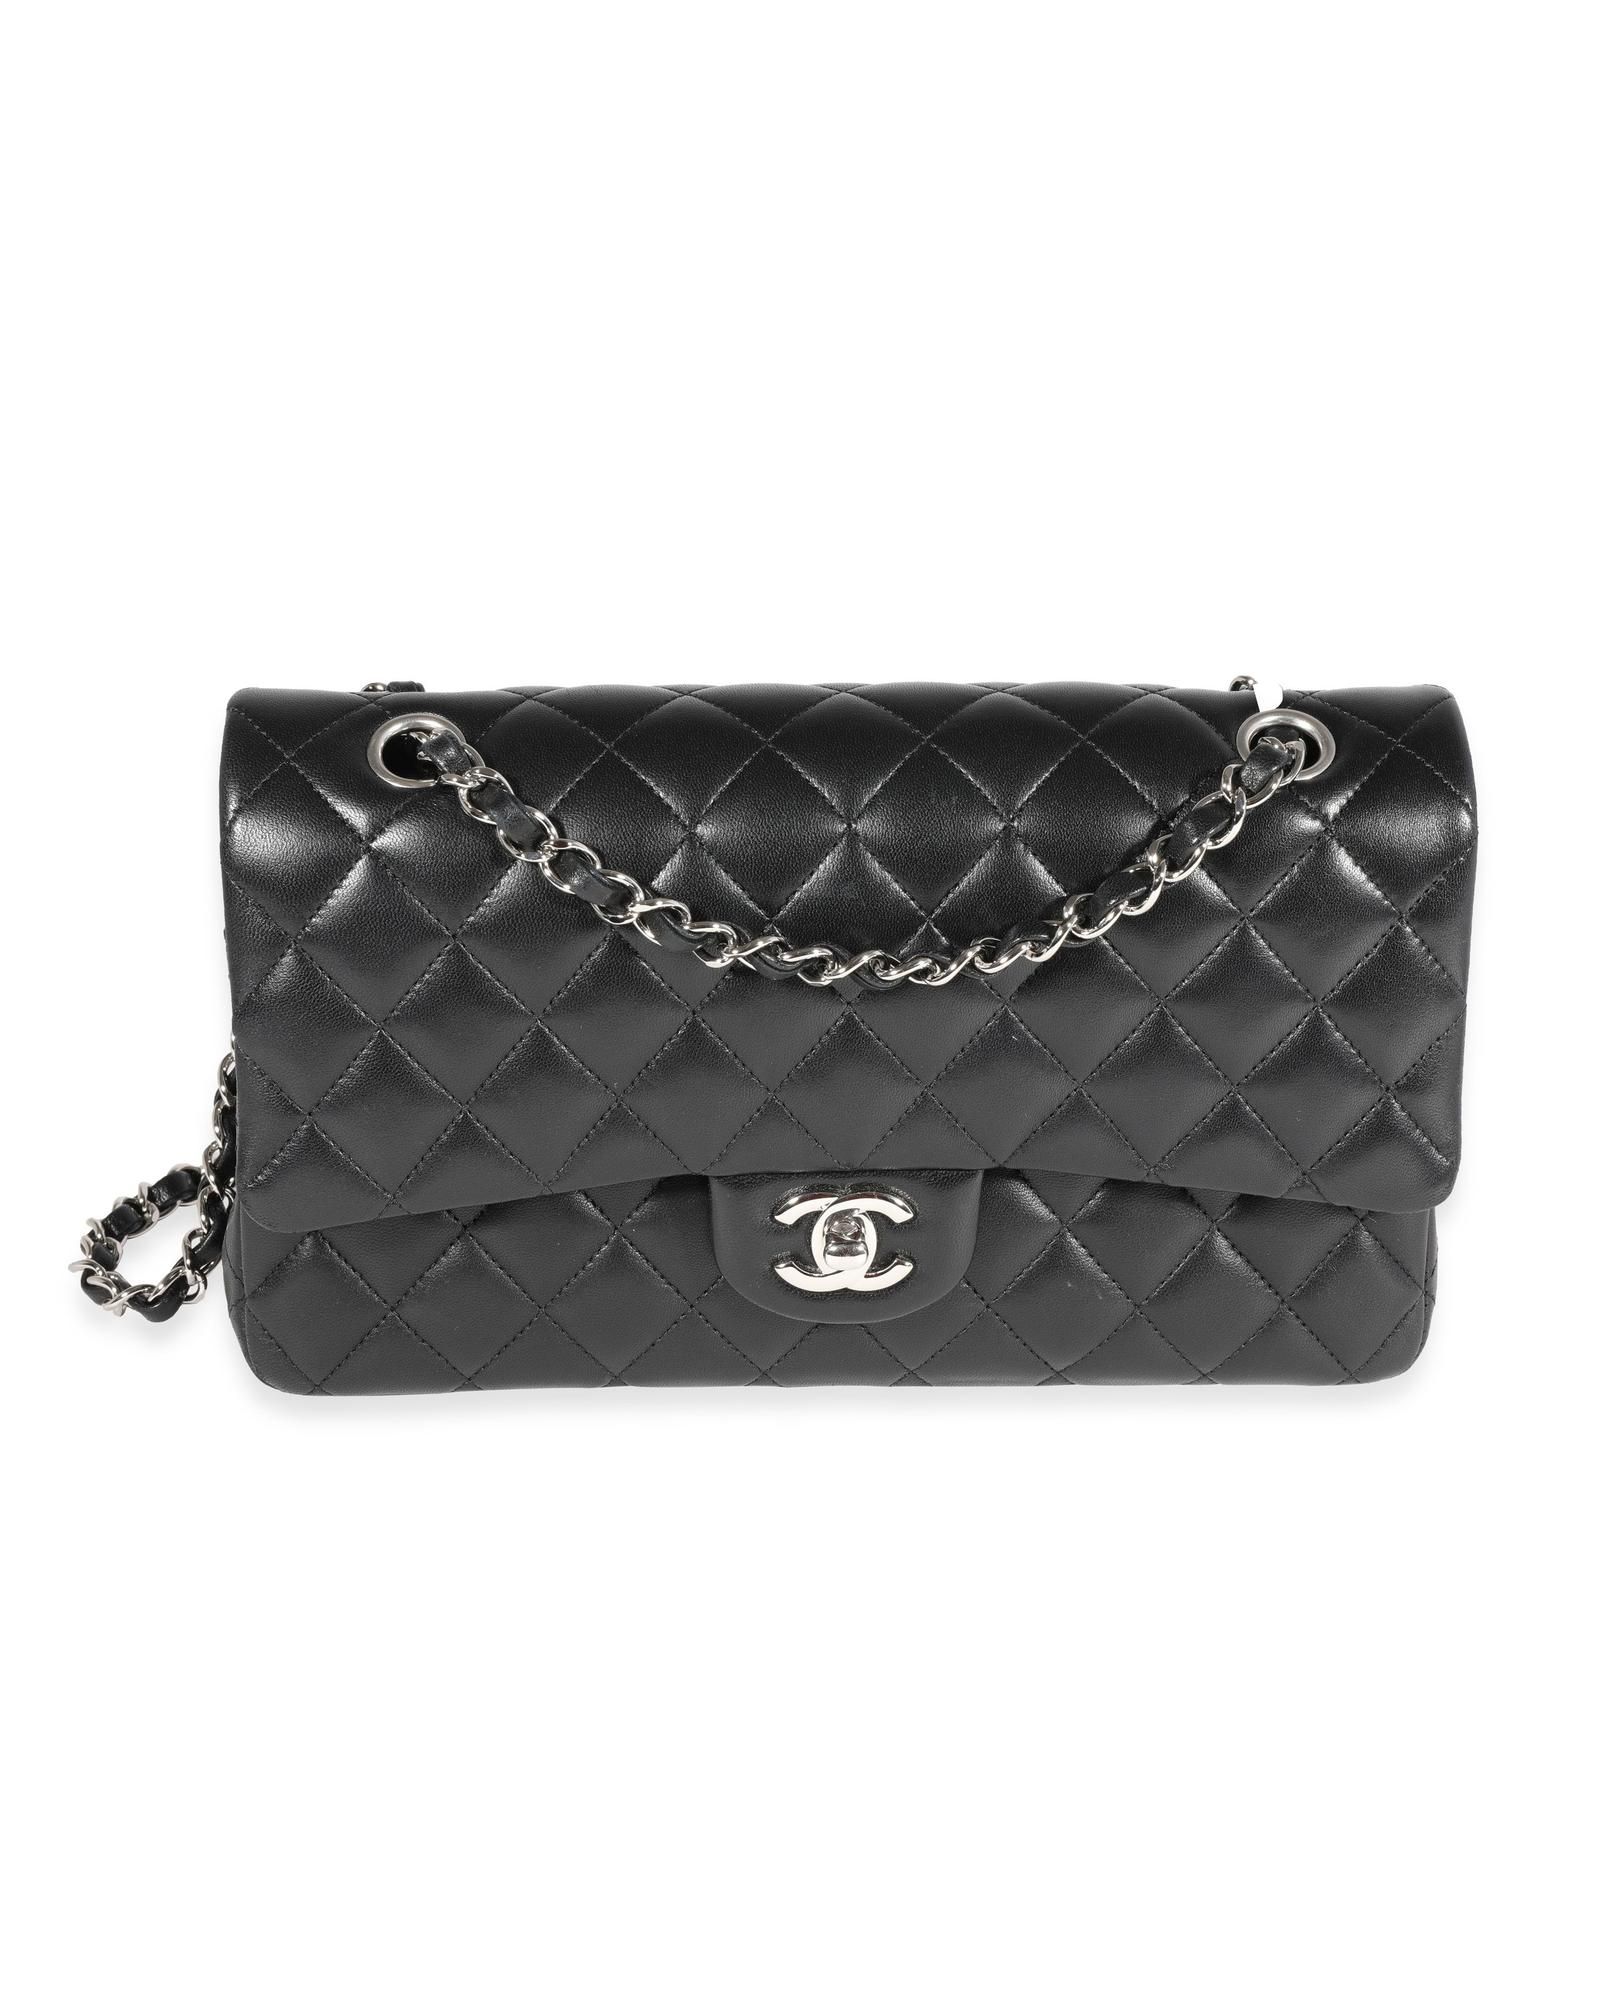 Chanel Chanel Black Quilted Lambskin Medium Classic Double Flap Bag